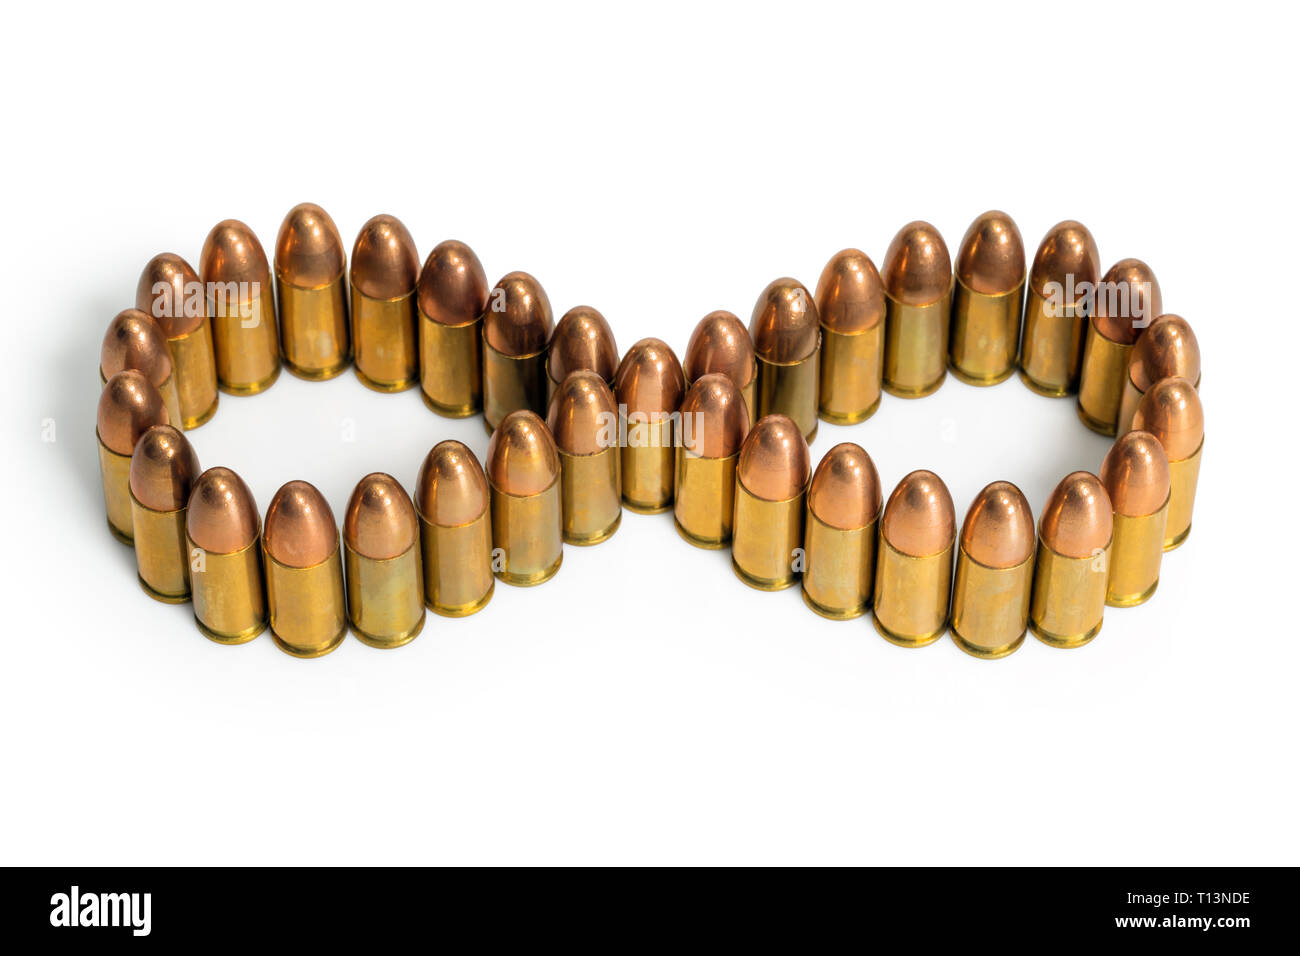 Infinity sign made from 9mm pistol bullets on white background. Stock Photo